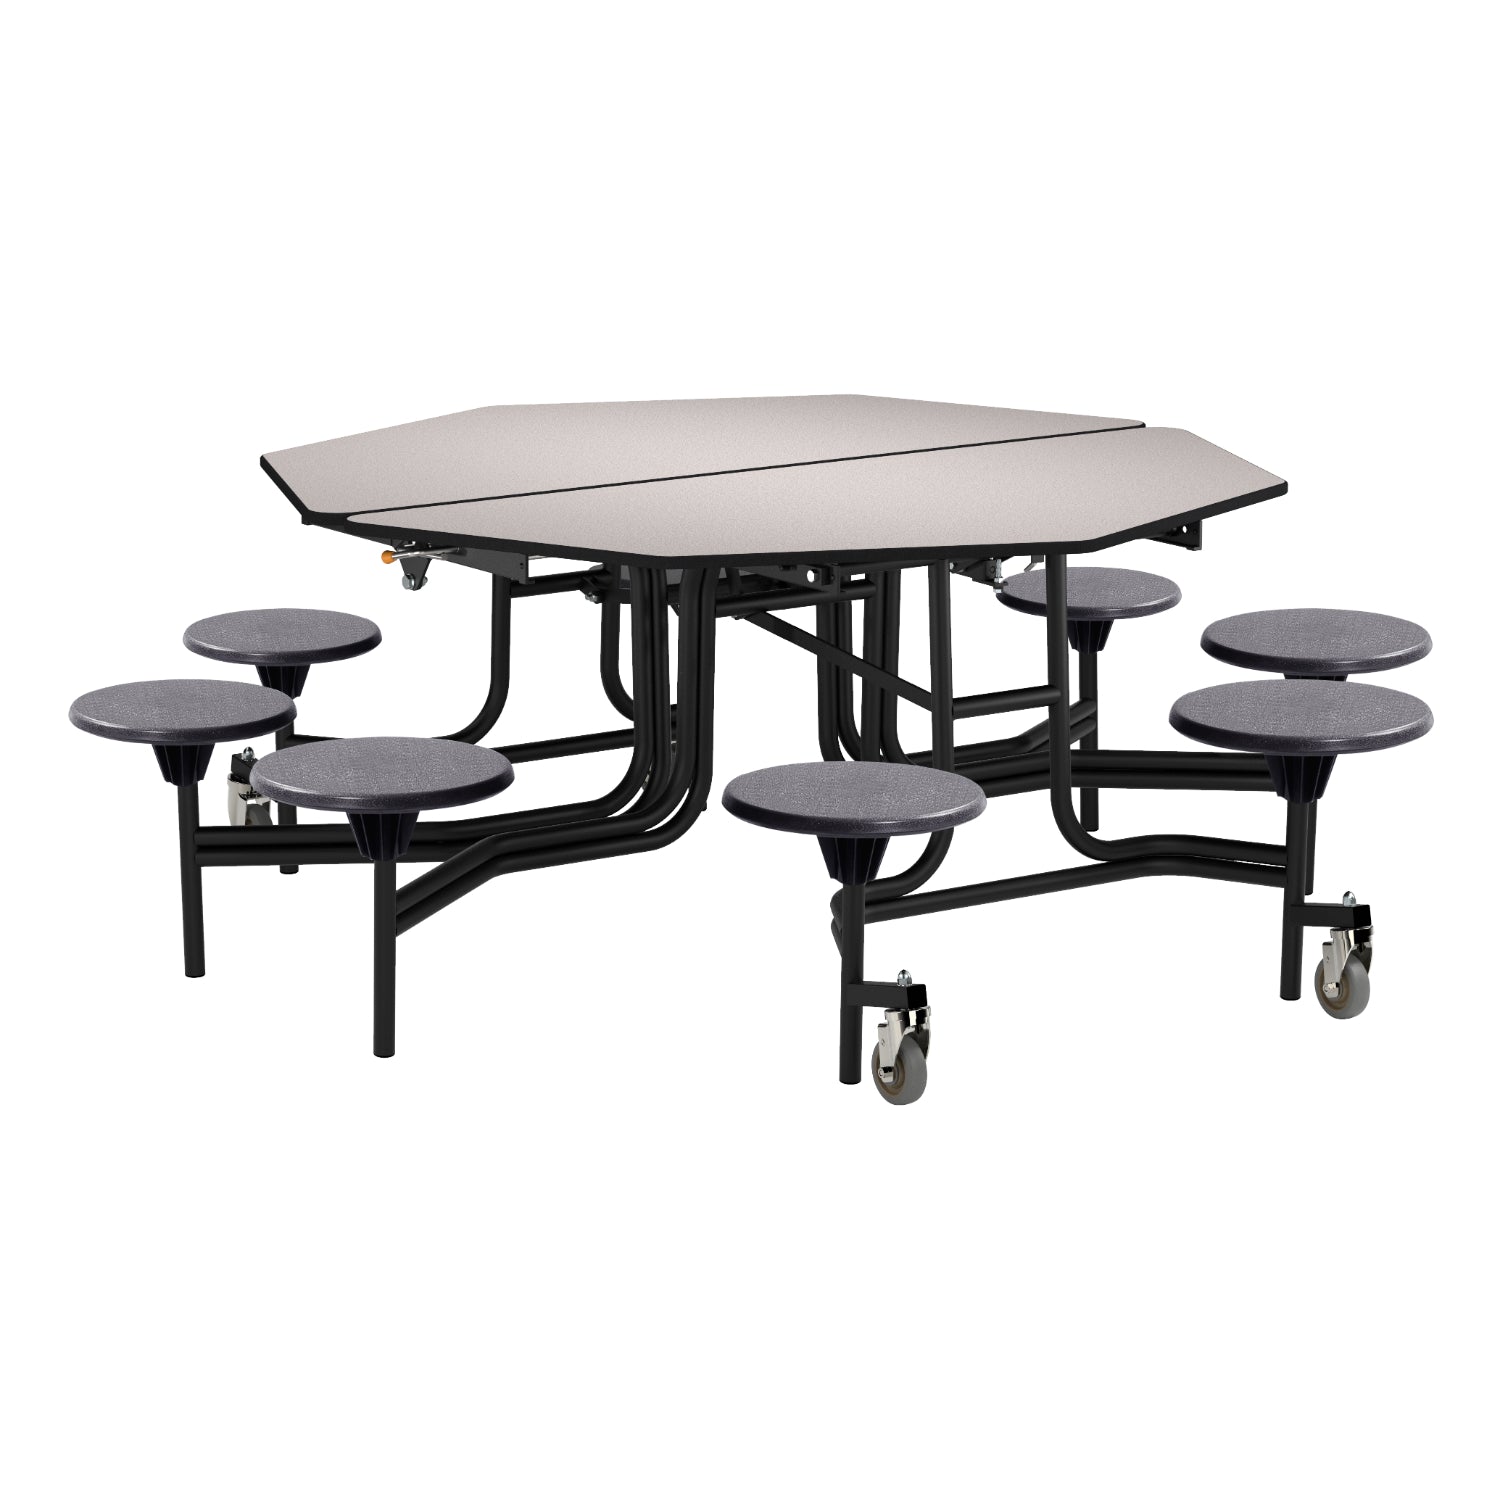 Mobile Cafeteria Table with 8 Stools, 60" Octagon, MDF Core, ProtectEdge, Textured Black Frame